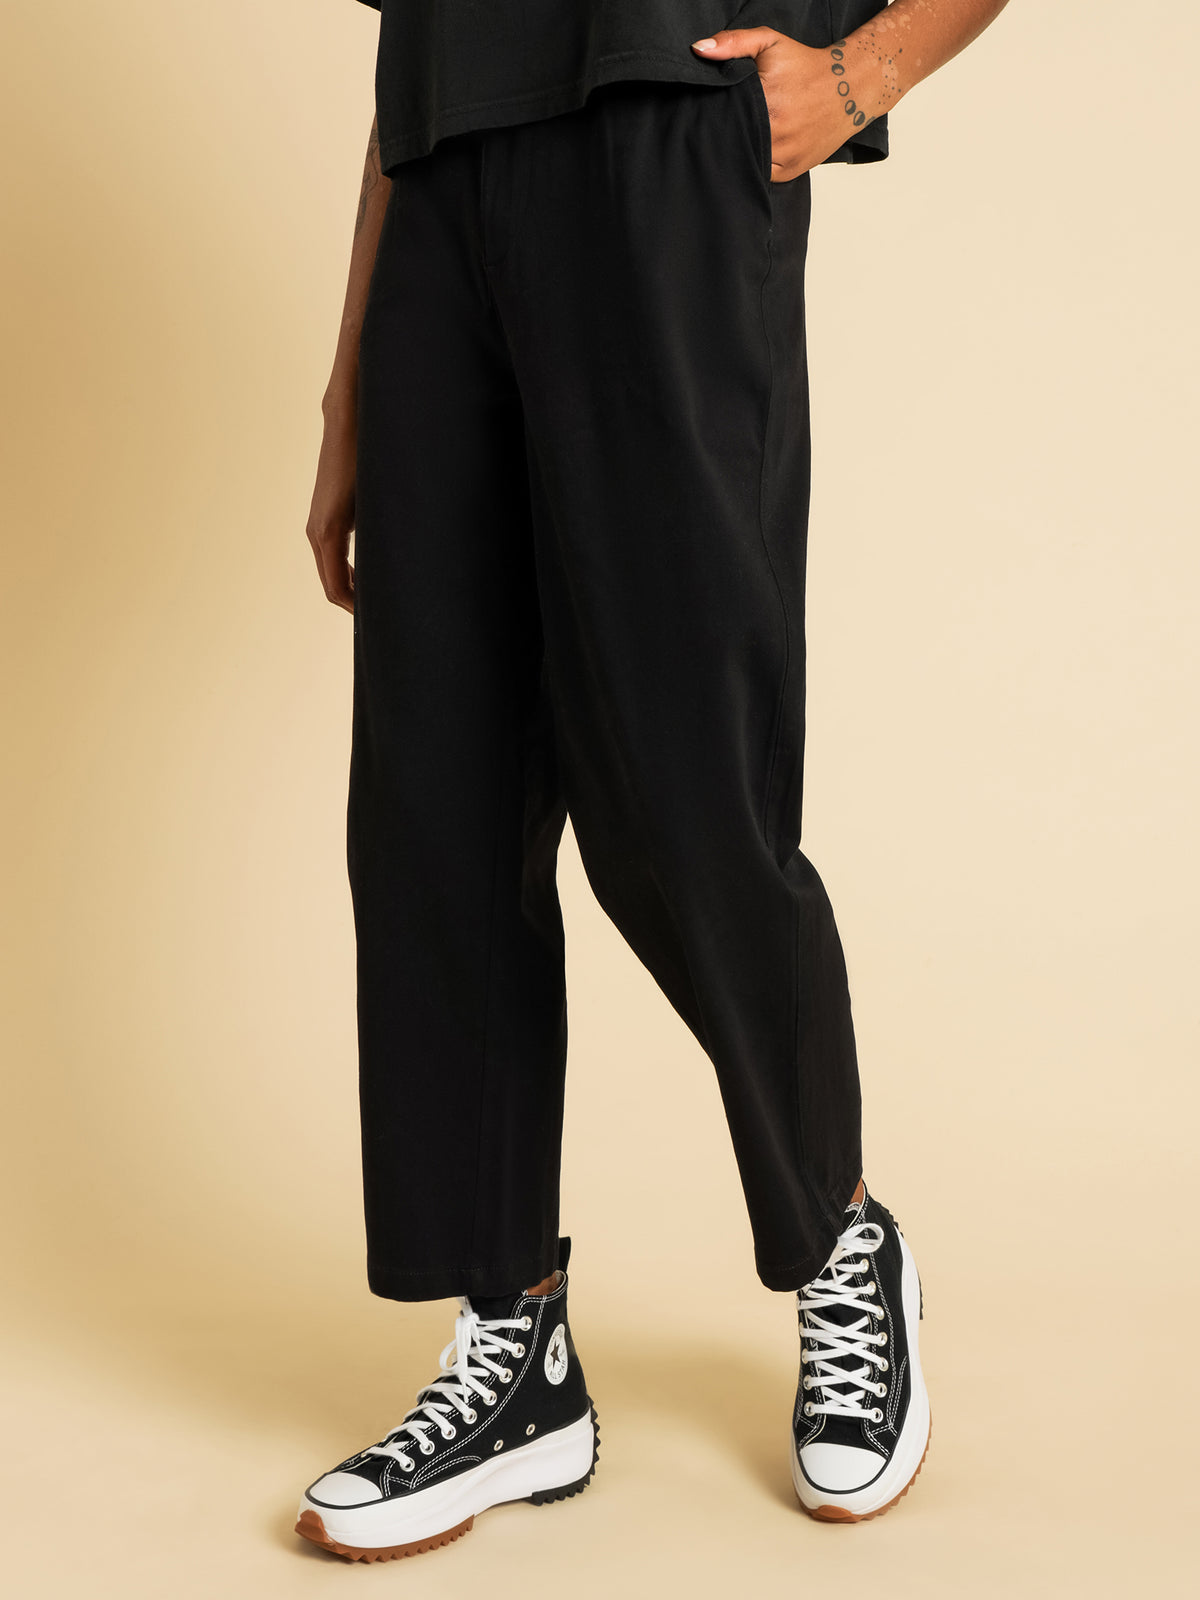 Lowry Chino Pants in Black